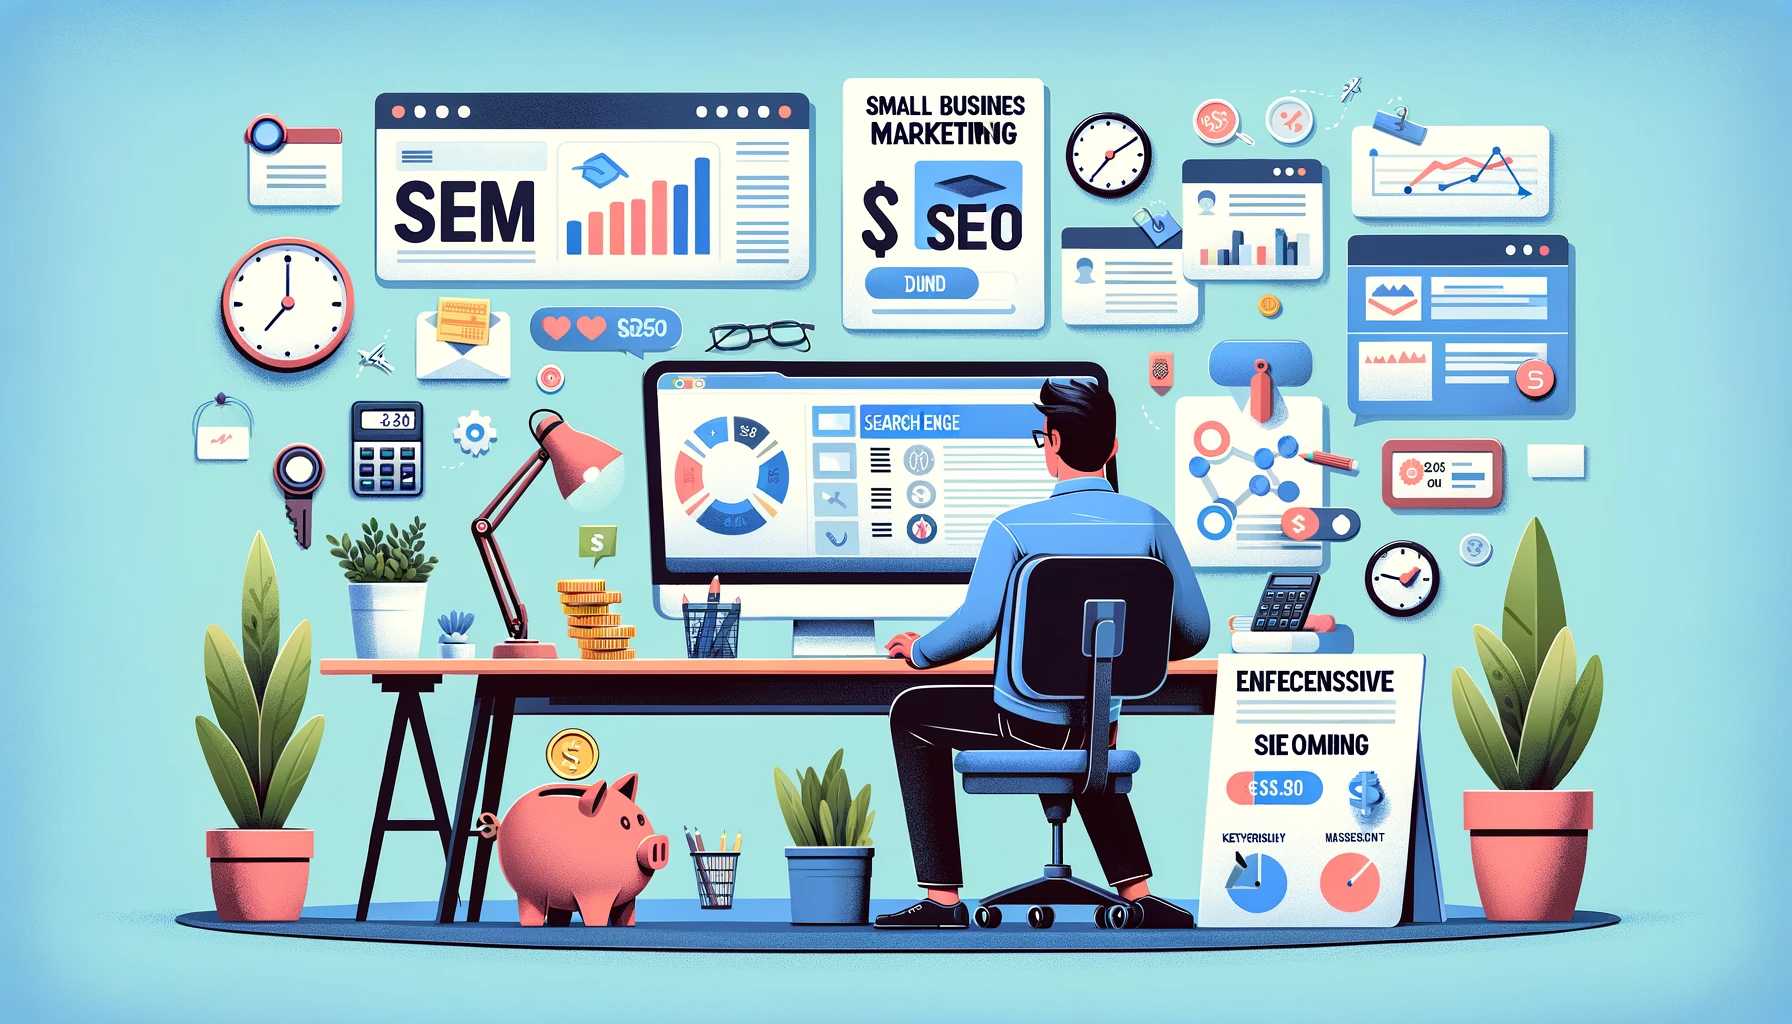 Inexpensive SEM and SEO Tips for Small Businesses